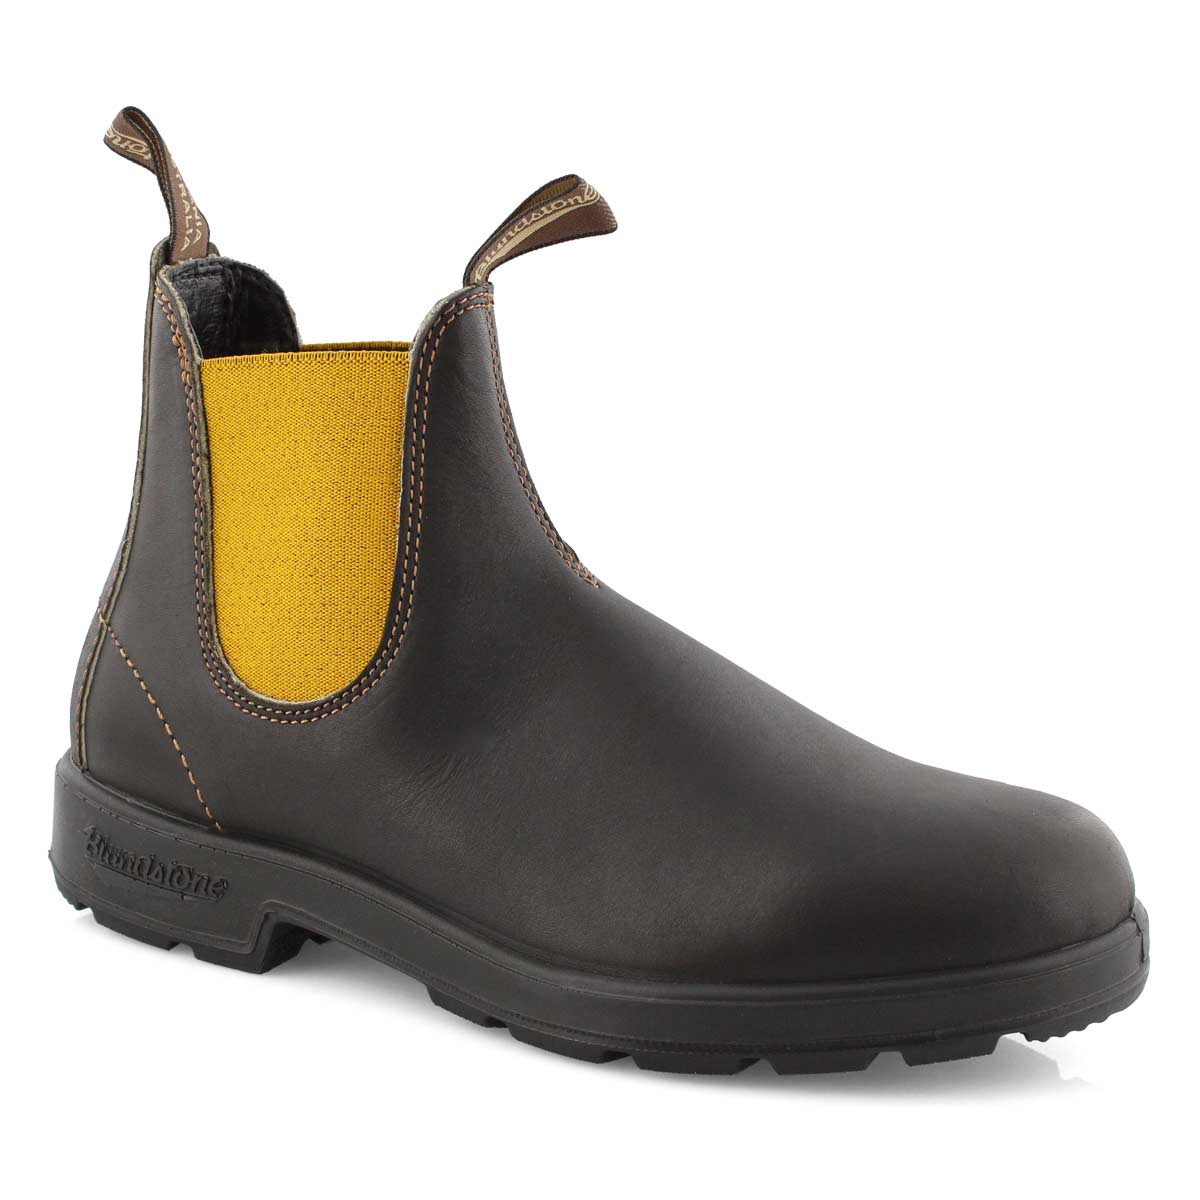 softmoc blundstone boots cheap online